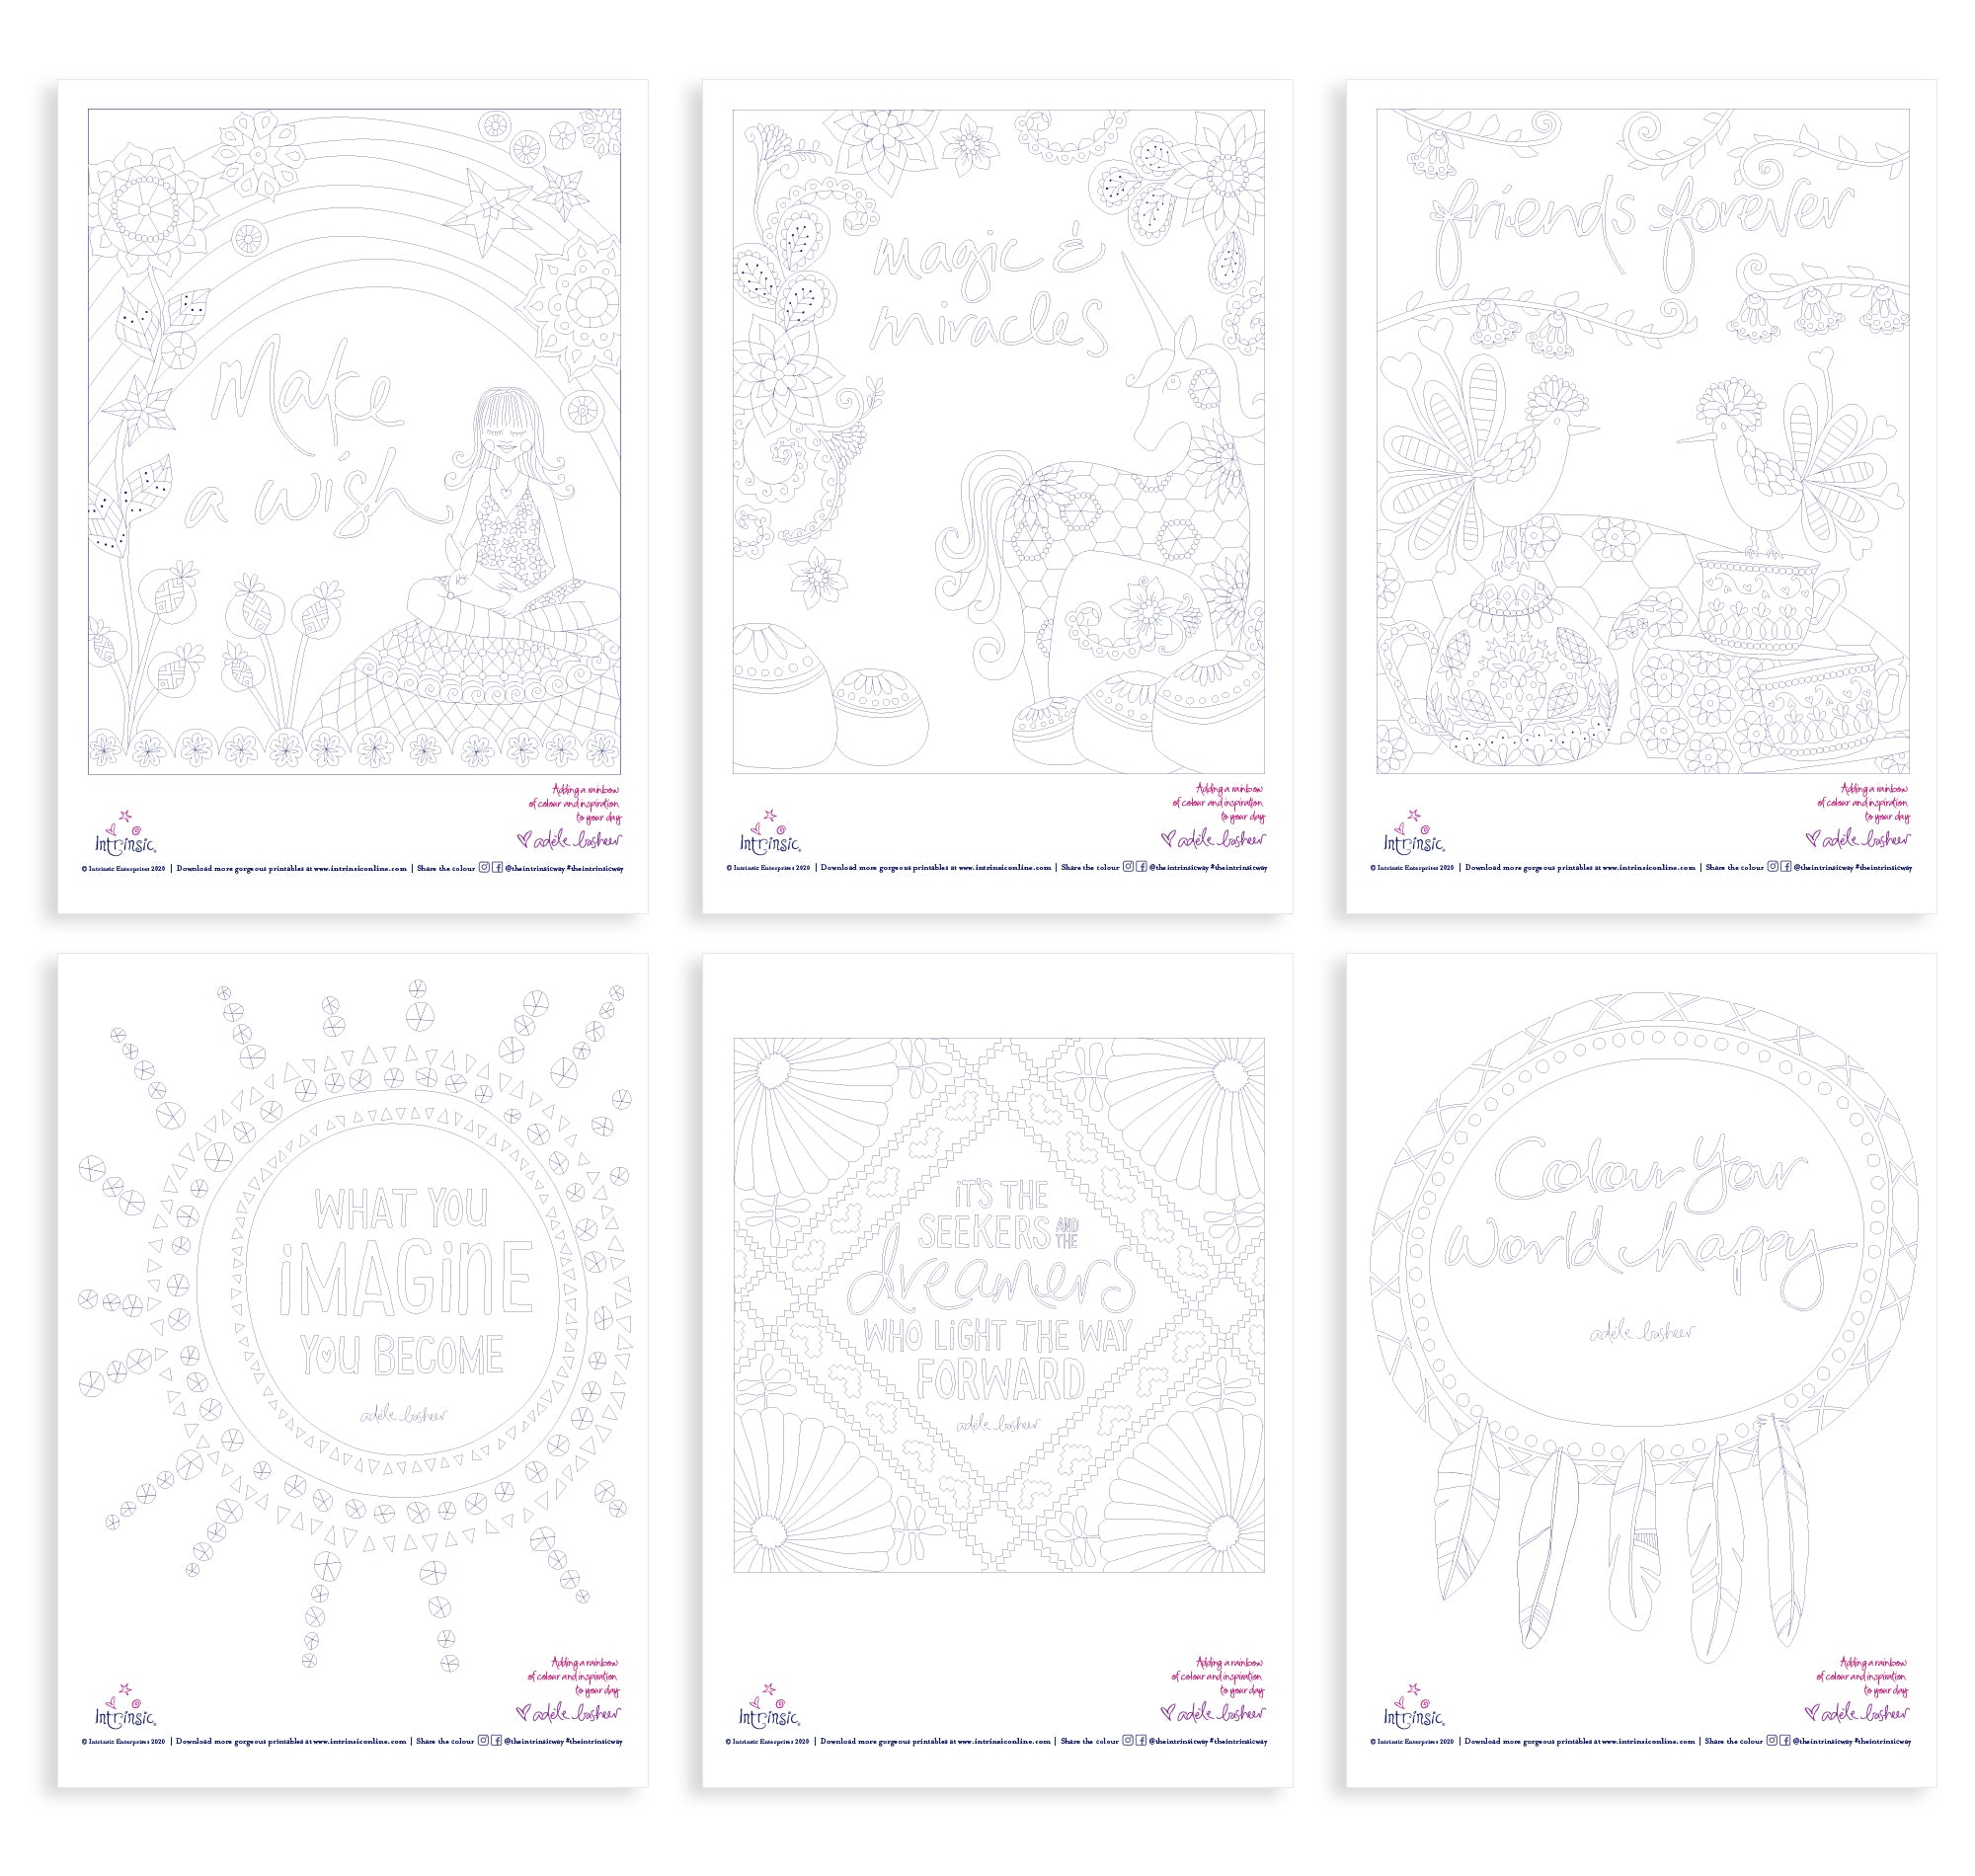 Intrinsic Mindfulness Colouring In Printables, New Designs 